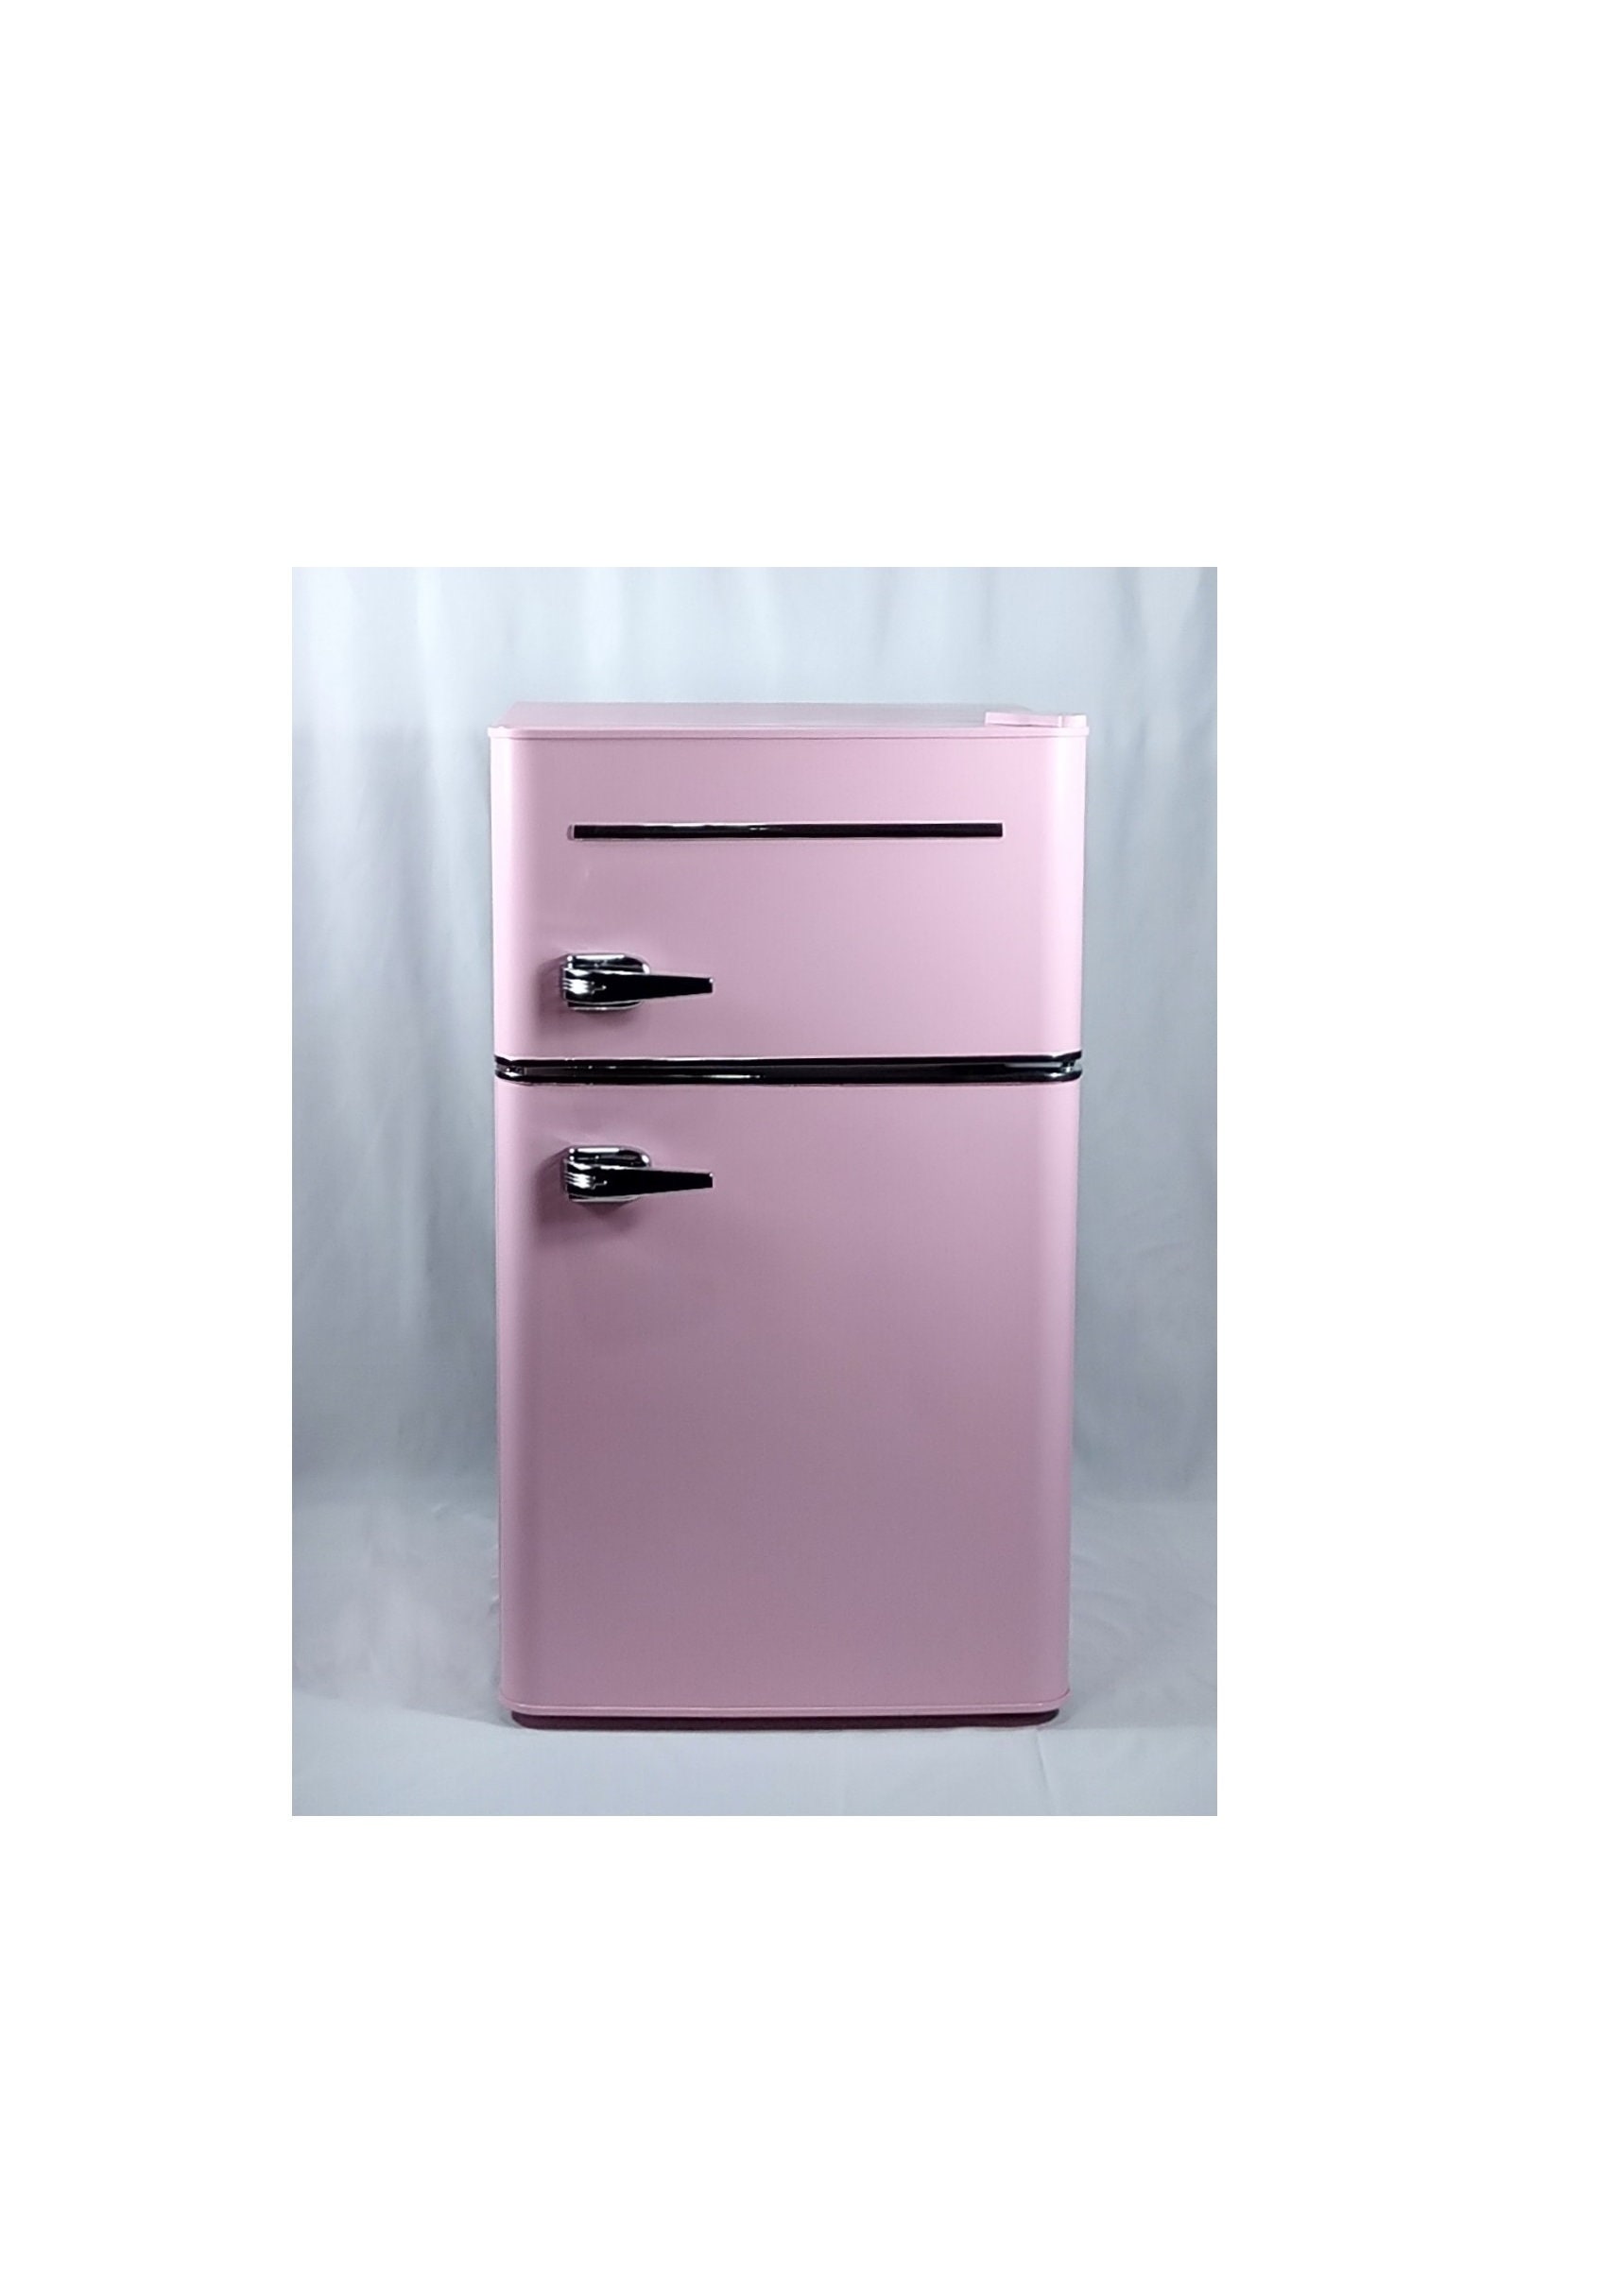 Small Refrigerator With Compact Freezer Space for Sale in Miami